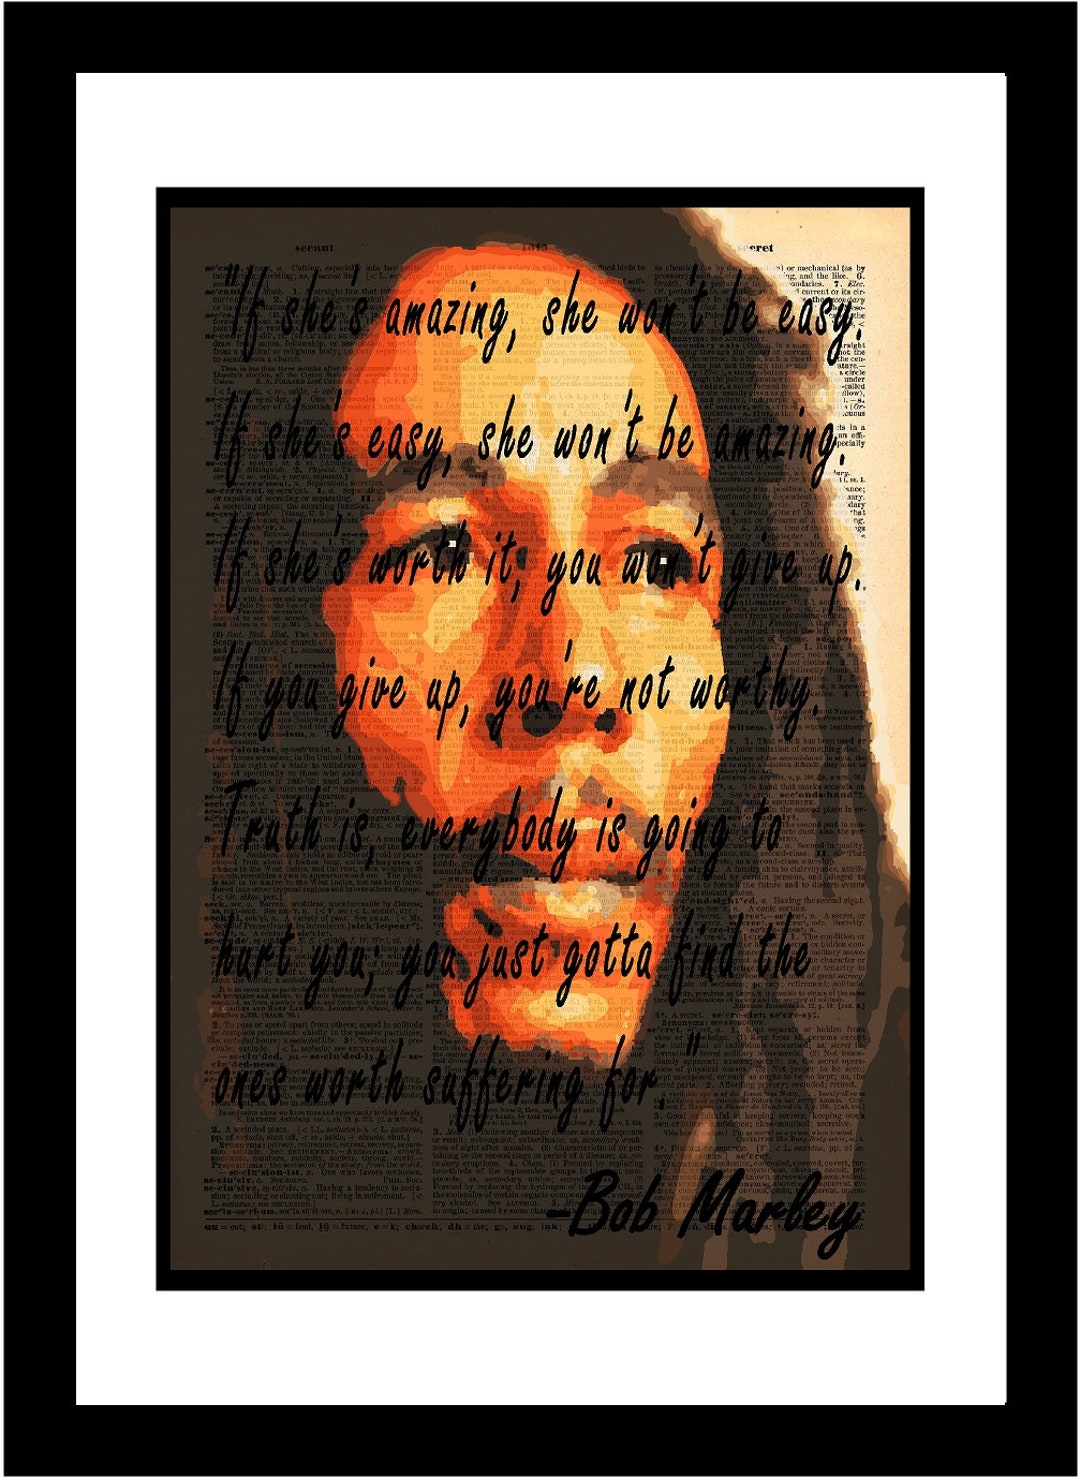 Bob Marley Quote Printed on Vintage Dictionary Old Paper Etsy Canada